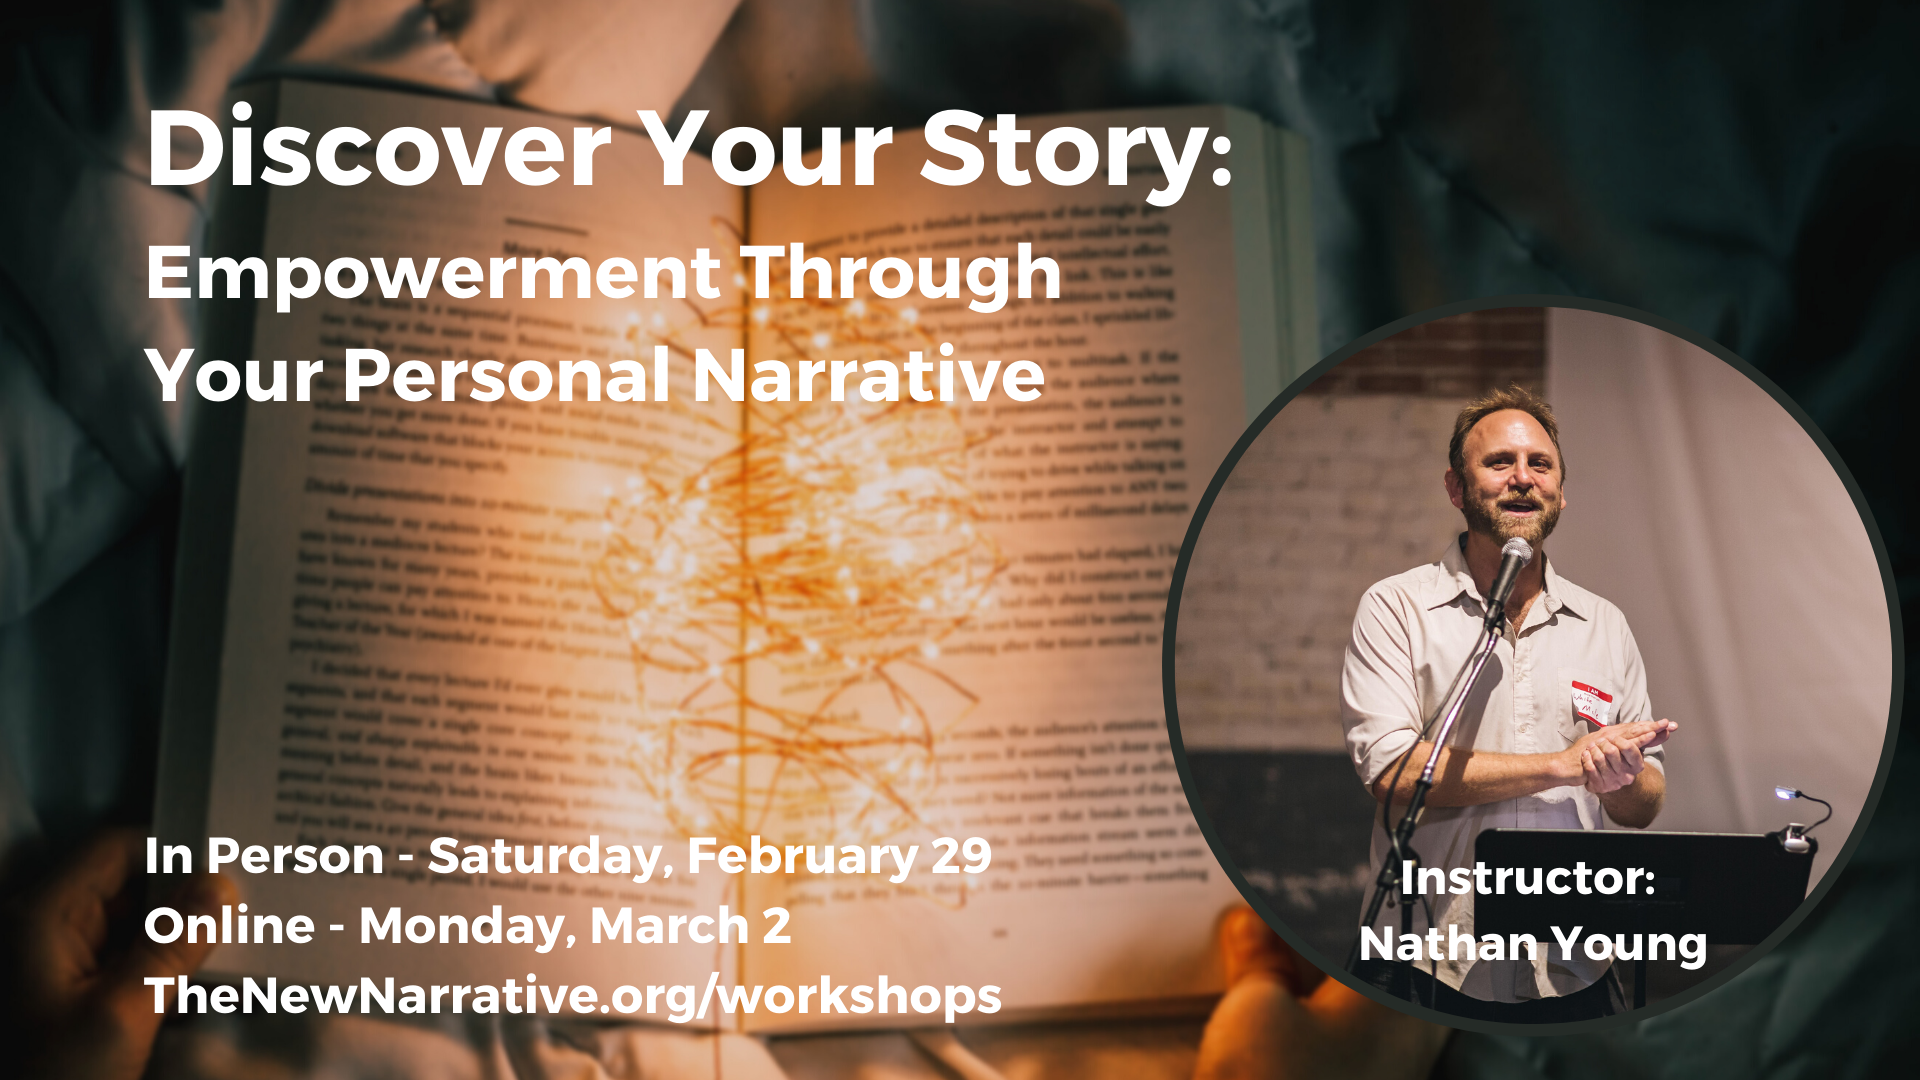 Discover Your Story: Empowerment Through Your Personal Narrative